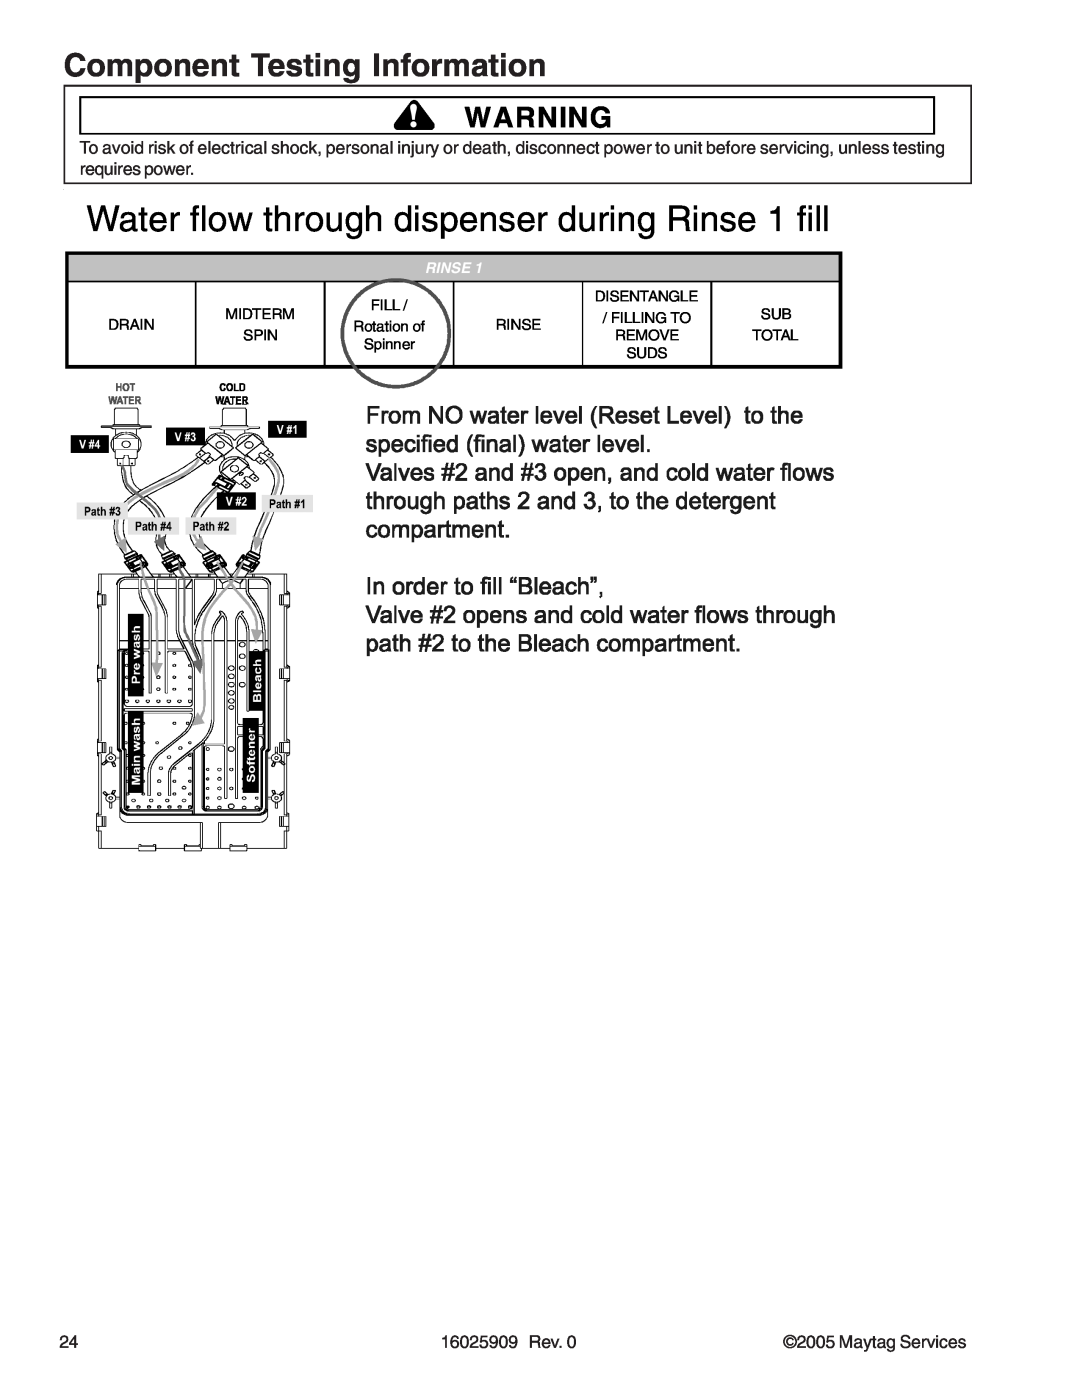 Whirlpool MAH9700AW manual Water flow through dispenser during Rinse 1 fill, Component Testing Information, 16025909 Rev 